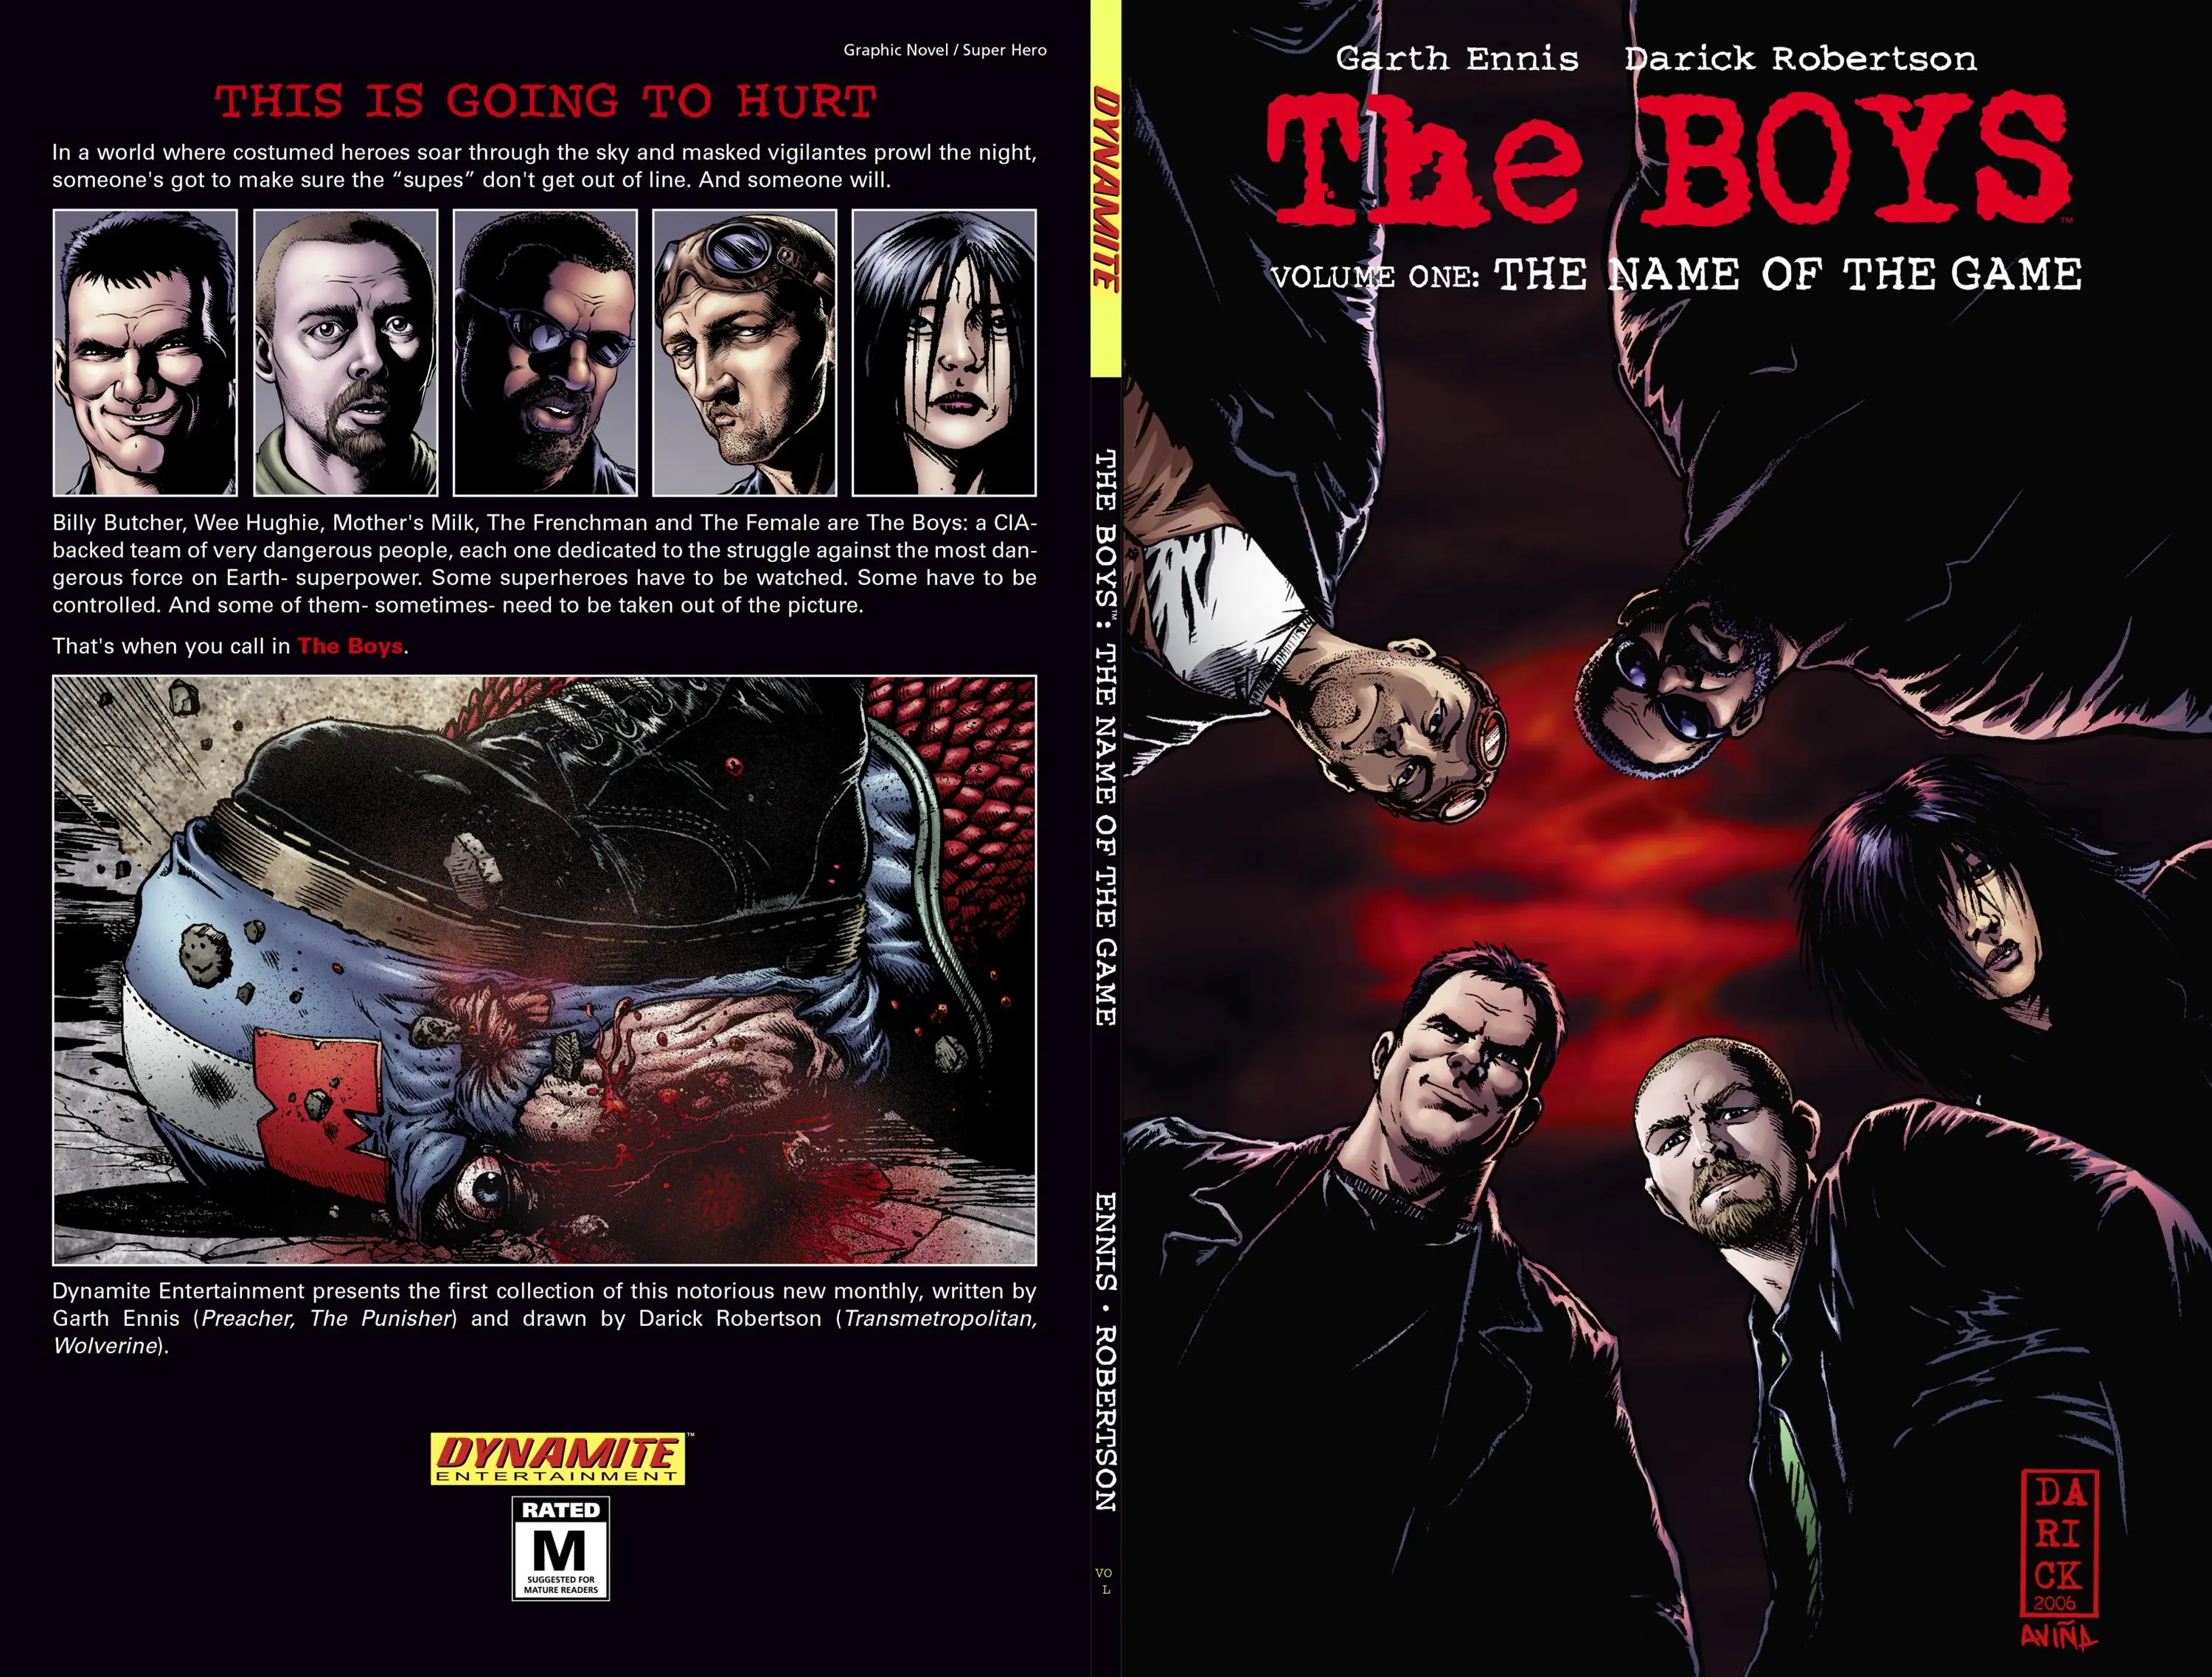 The game name 2. The boys игра. The name of the game the boys. Game name.